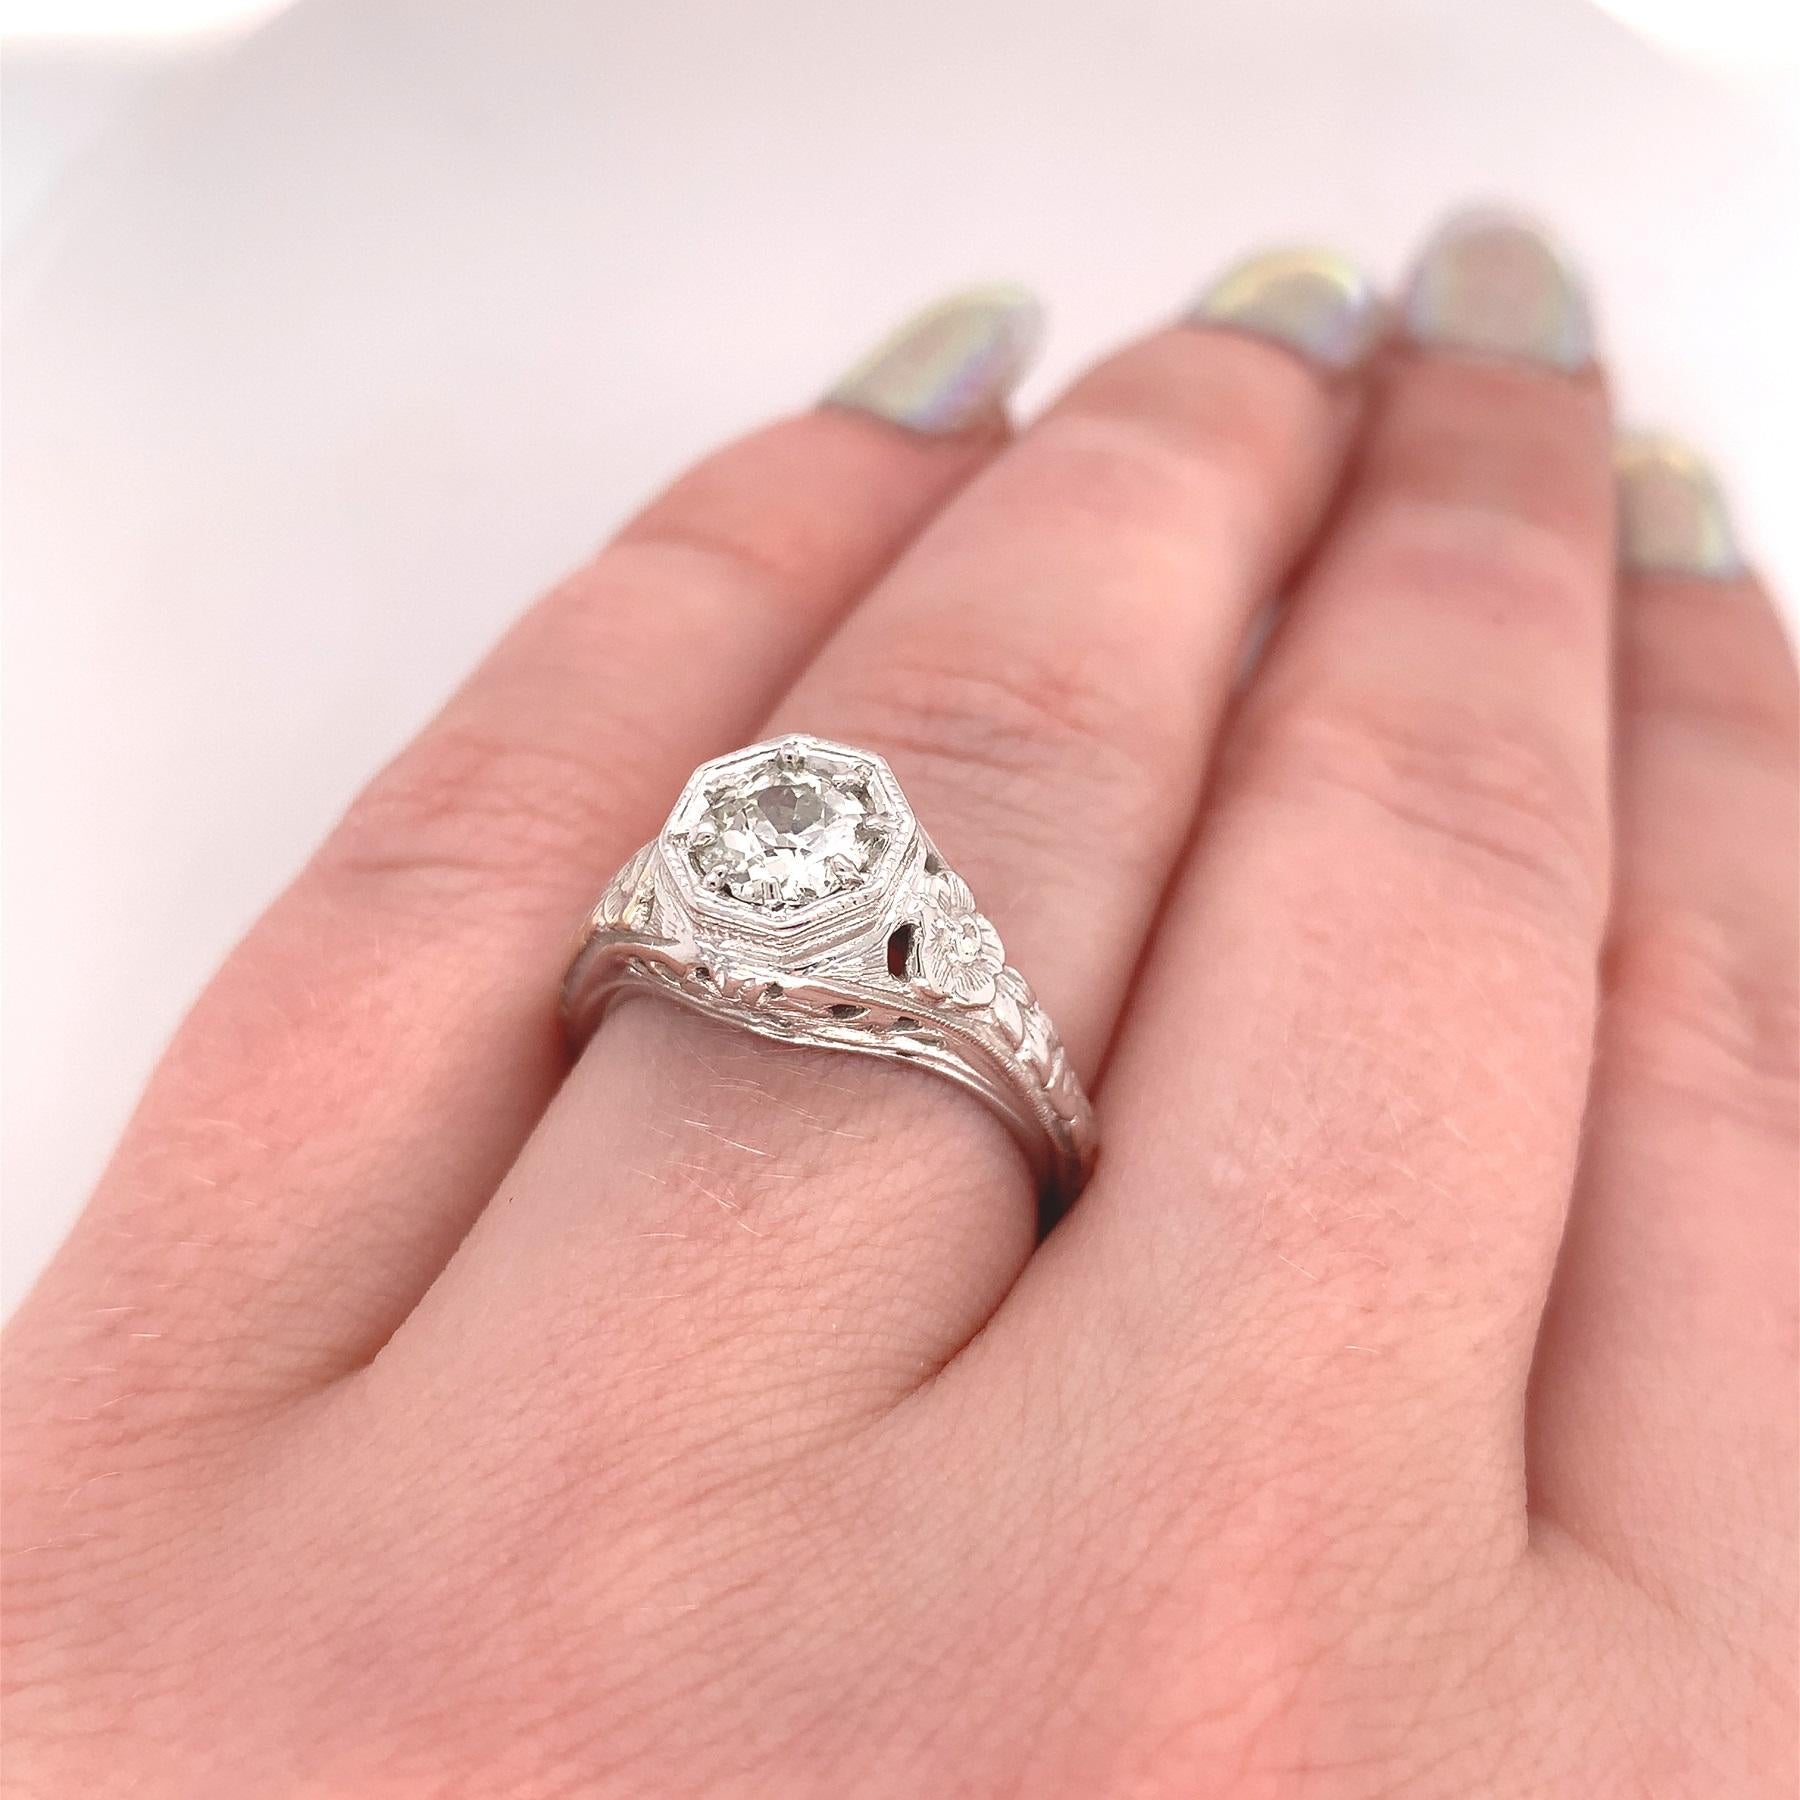 14K White Gold Filigree 3/4 Carat Diamond Ring In Excellent Condition For Sale In Big Bend, WI